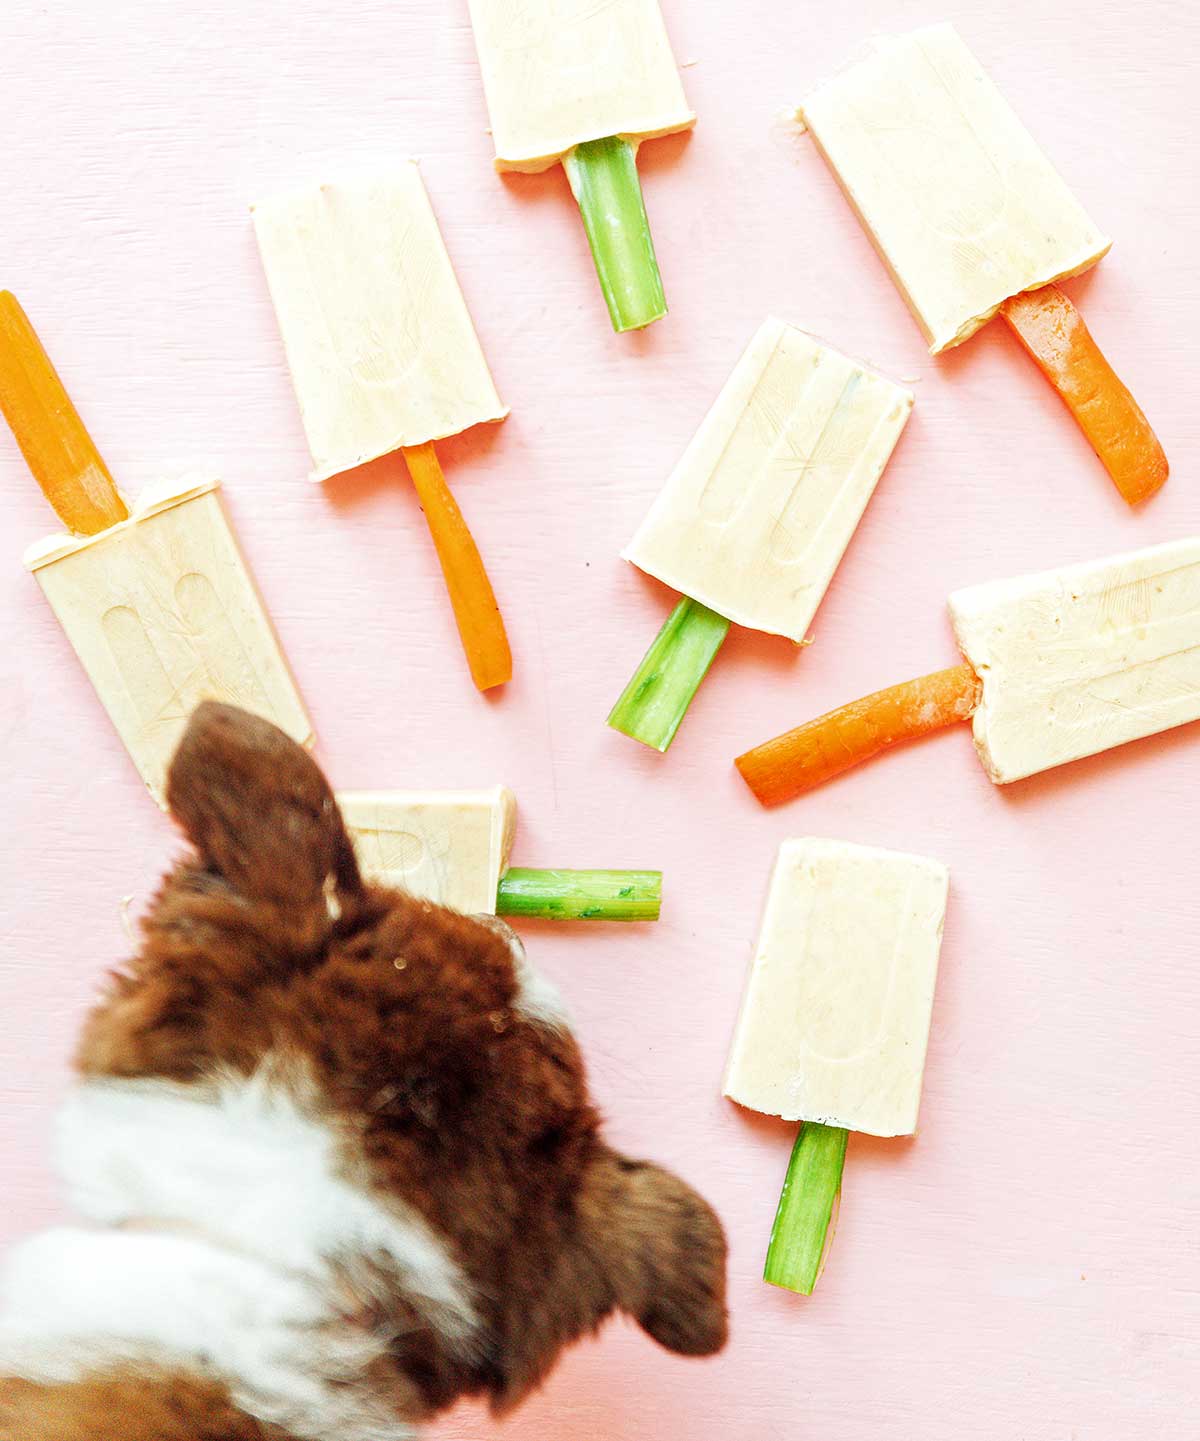 Dog eating dog pupsicles with carrot and celery sticks